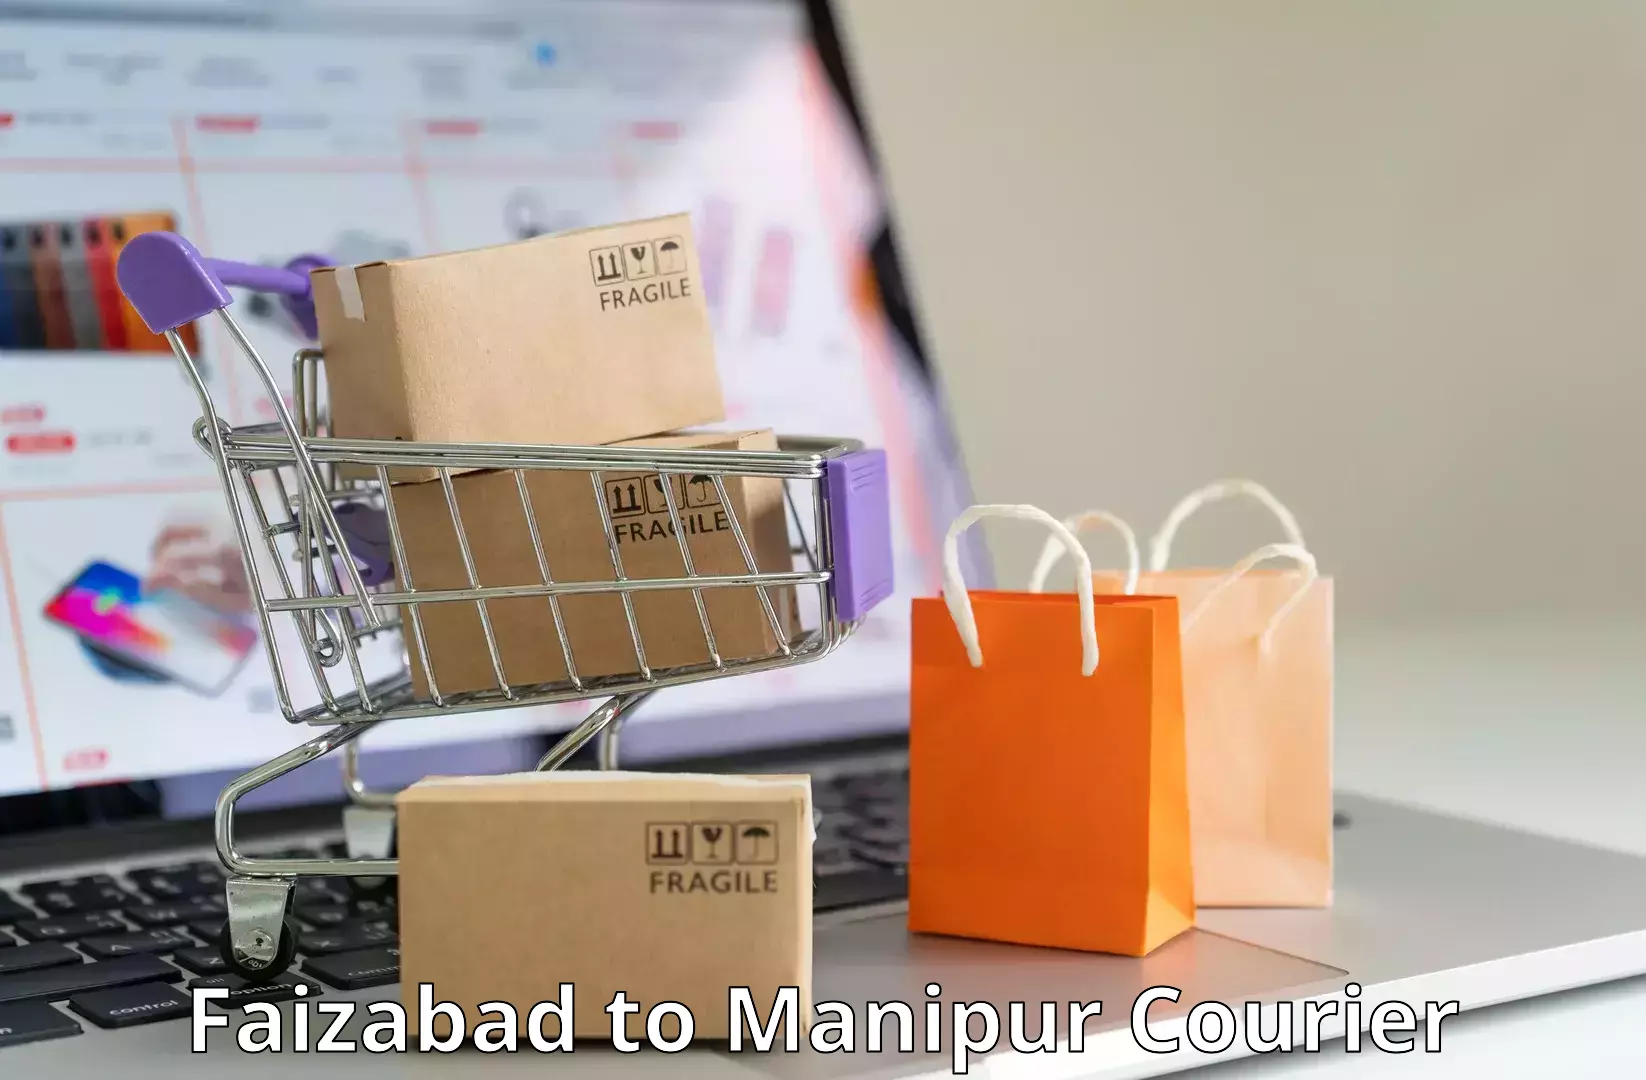 International courier networks Faizabad to Manipur